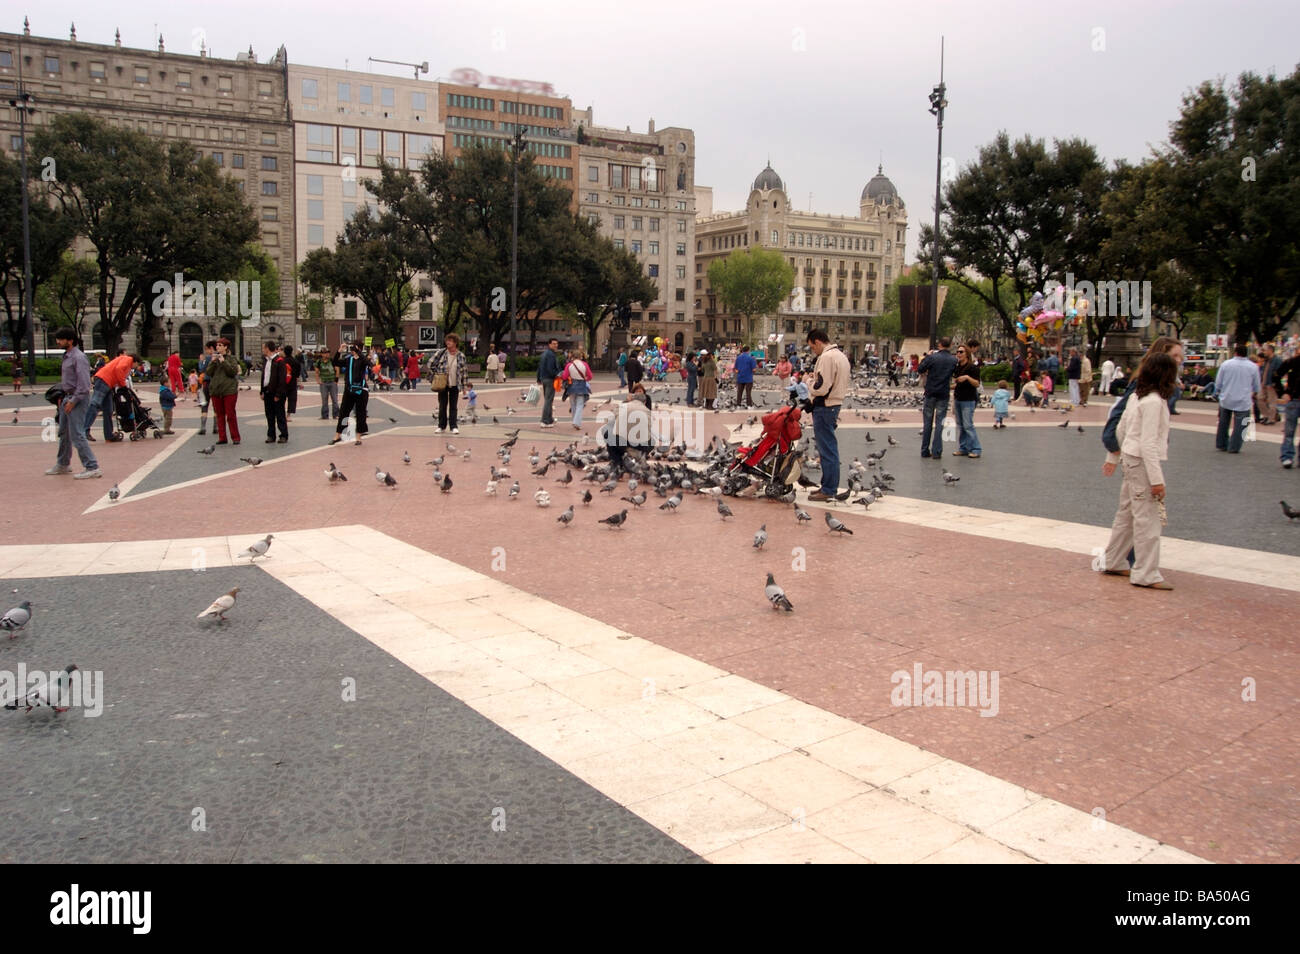 The square in Barcelona with people and pigeons Stock Photo